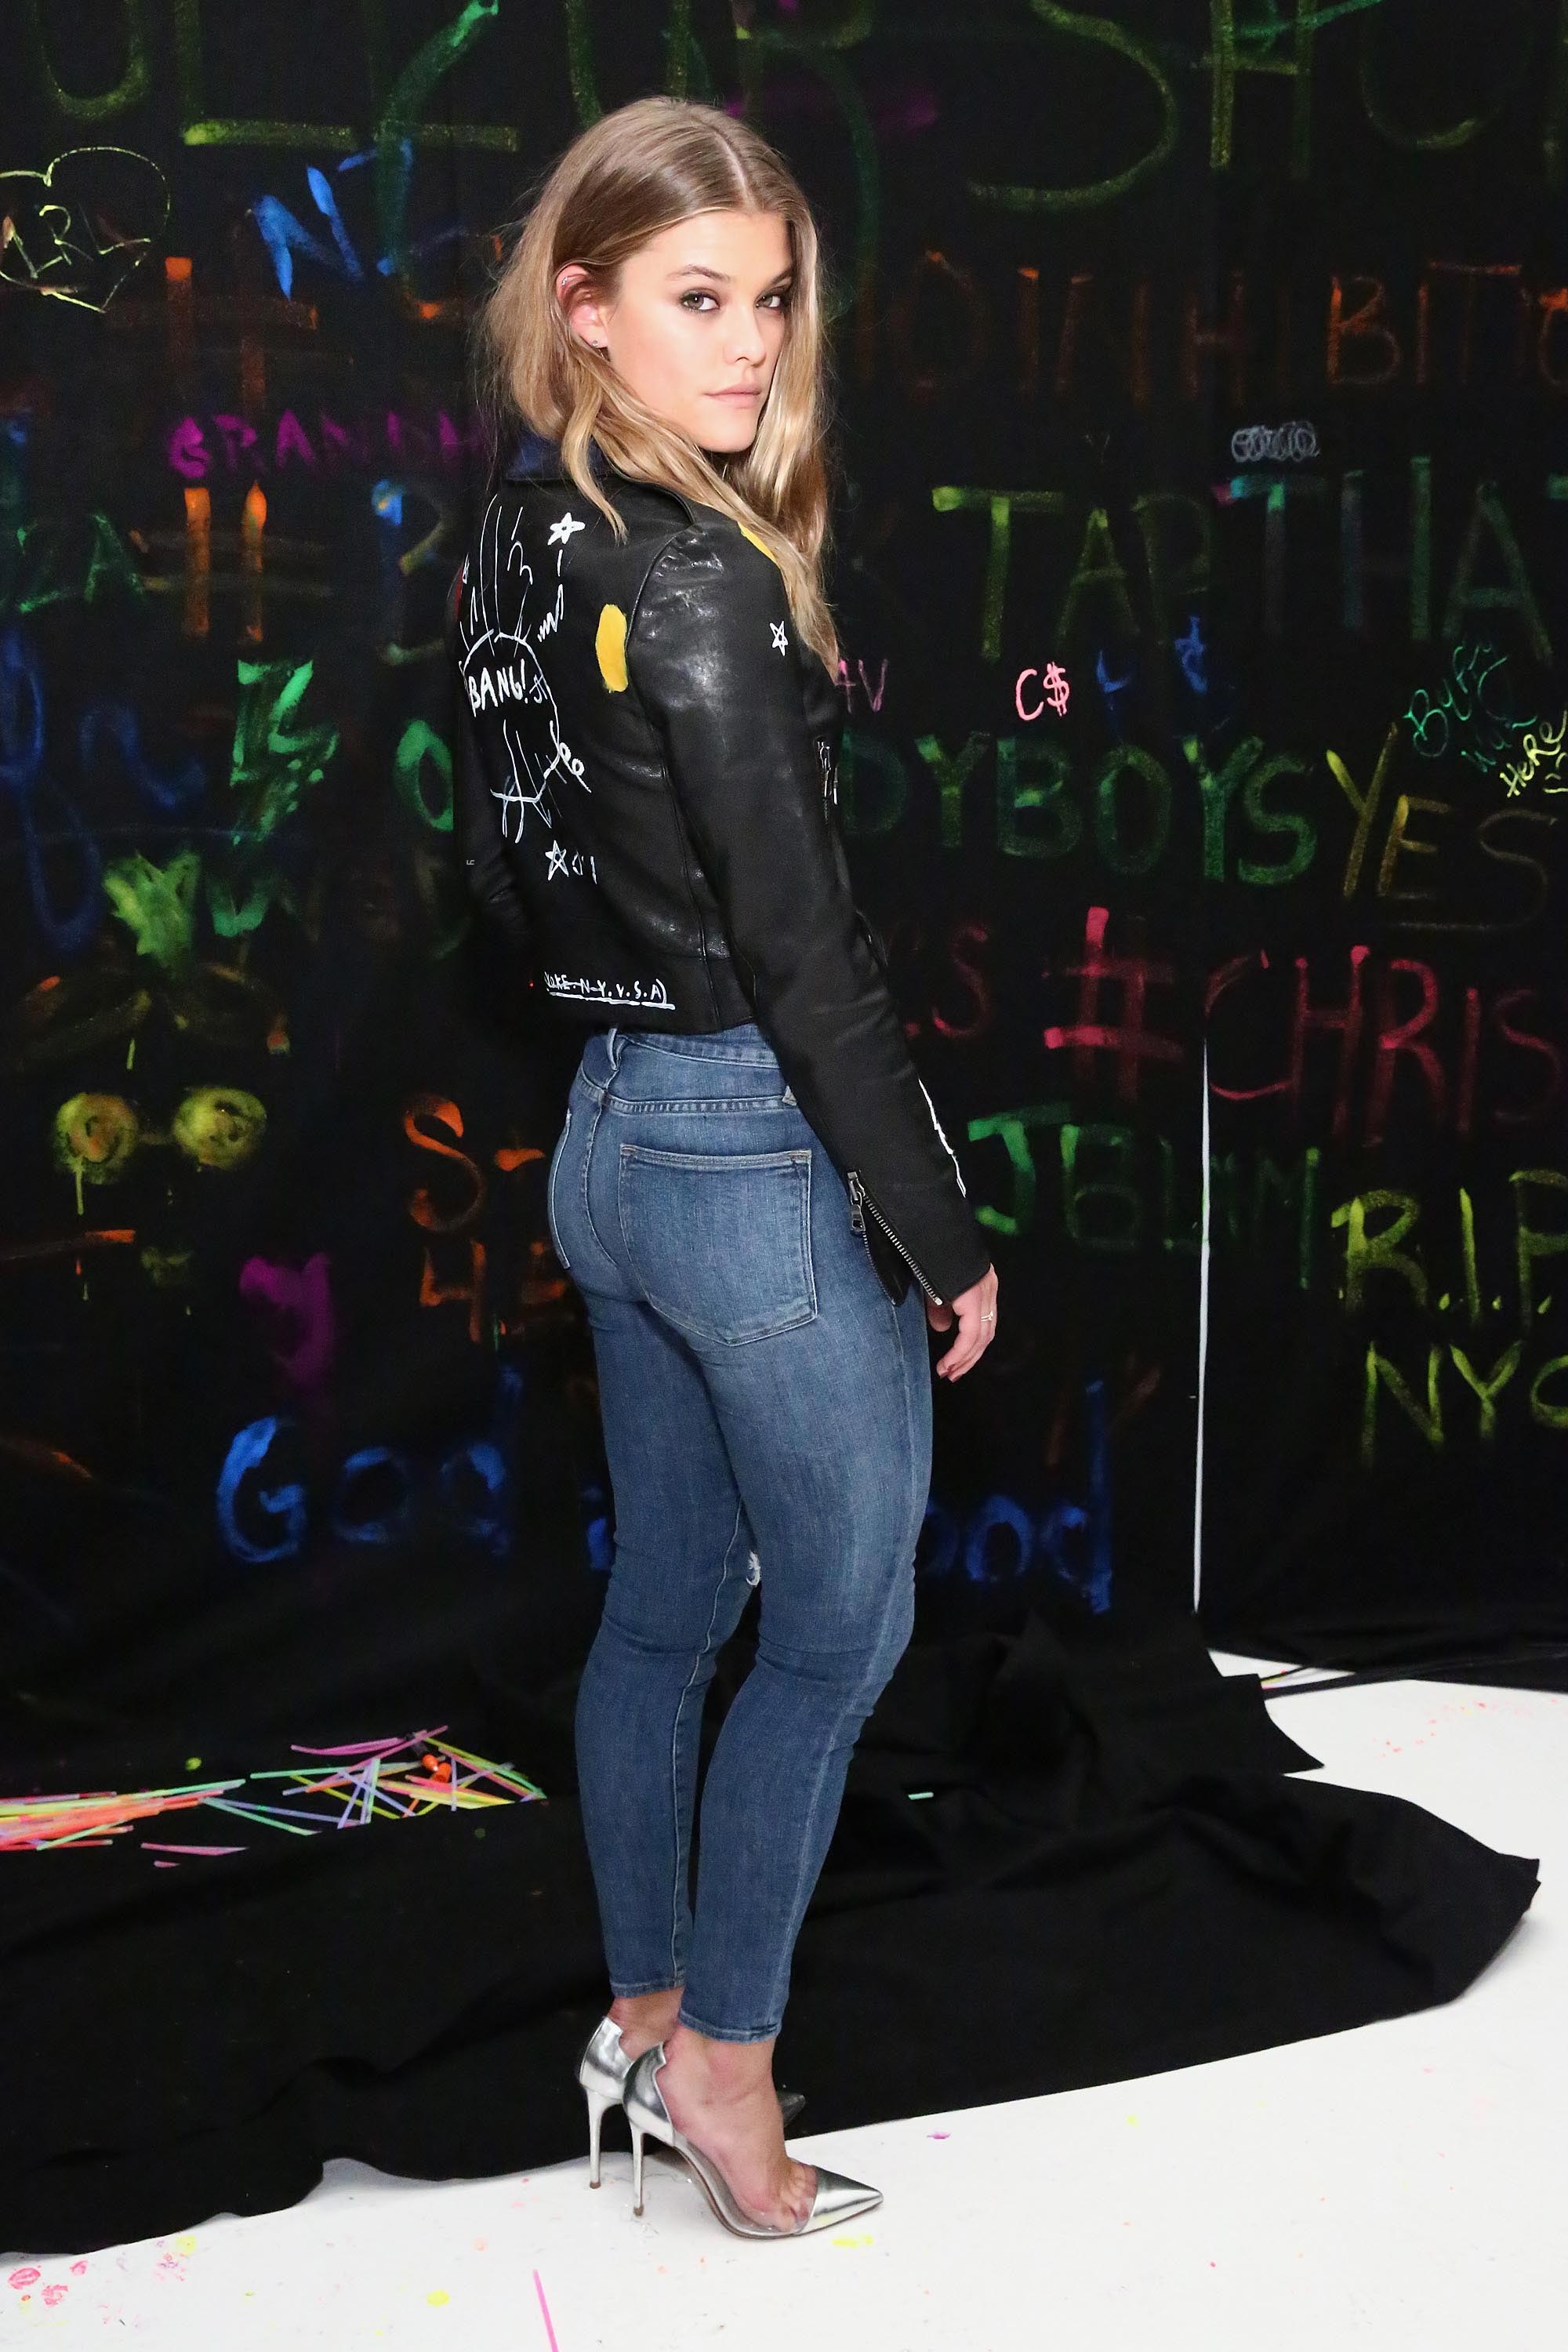 Nina Agdal attends the alice + olivia x Basquiat CFDA Capsule Collection launch party